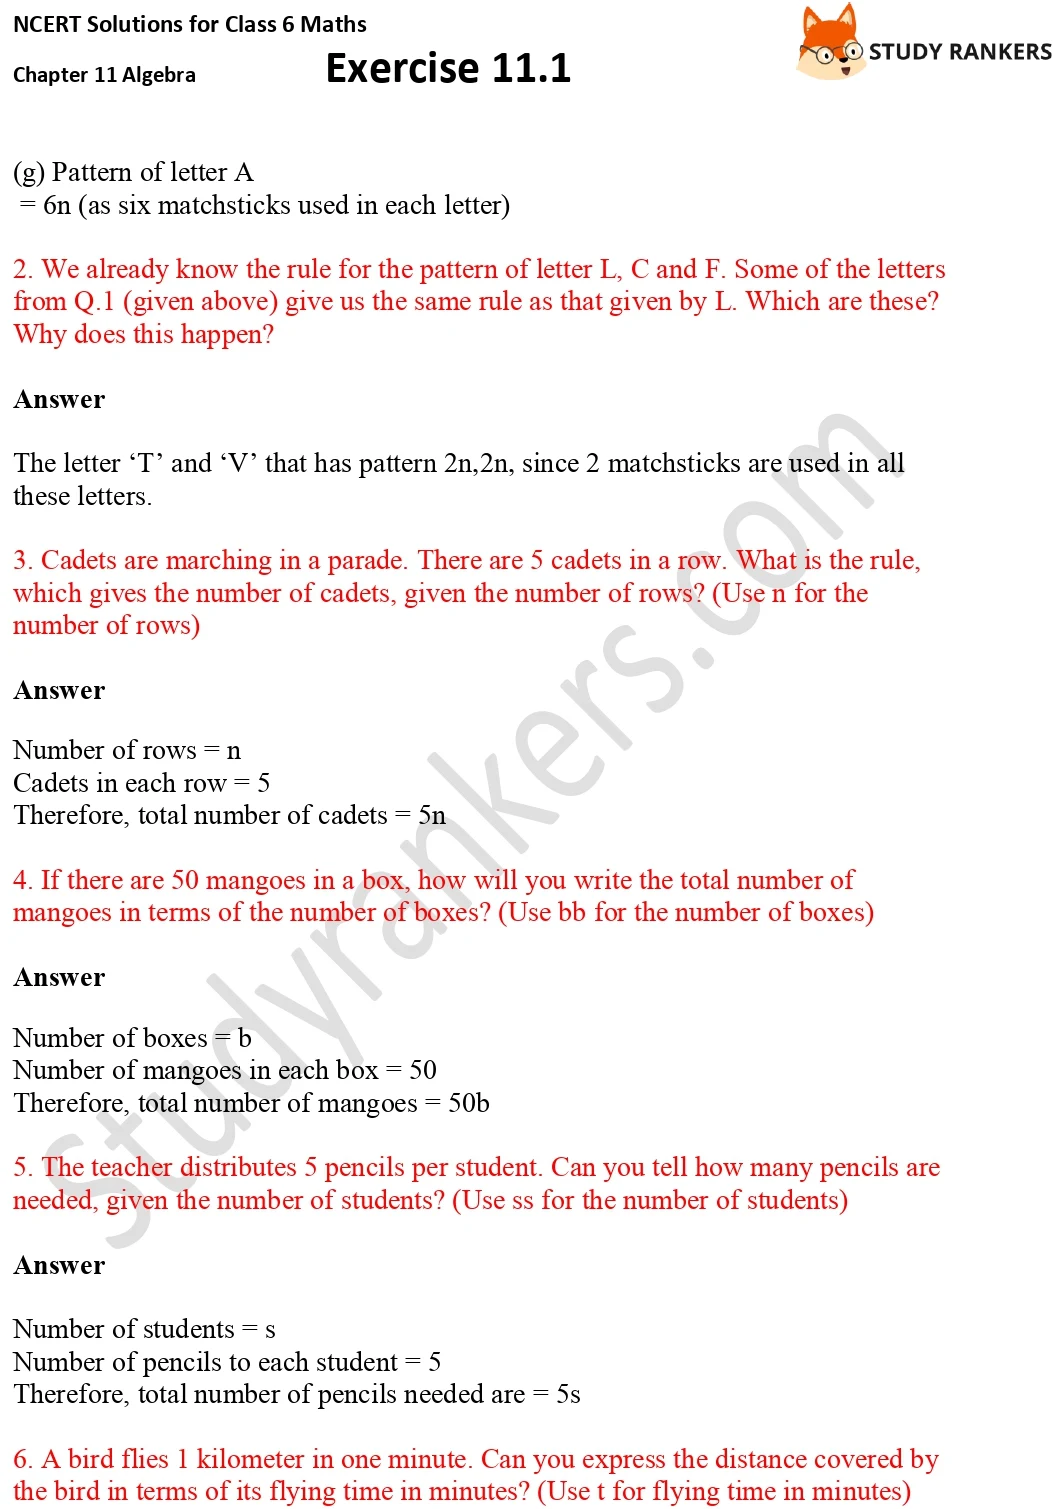 NCERT Solutions for Class 6 Maths Chapter 11 Algebra Exercise 11.1 Part 2